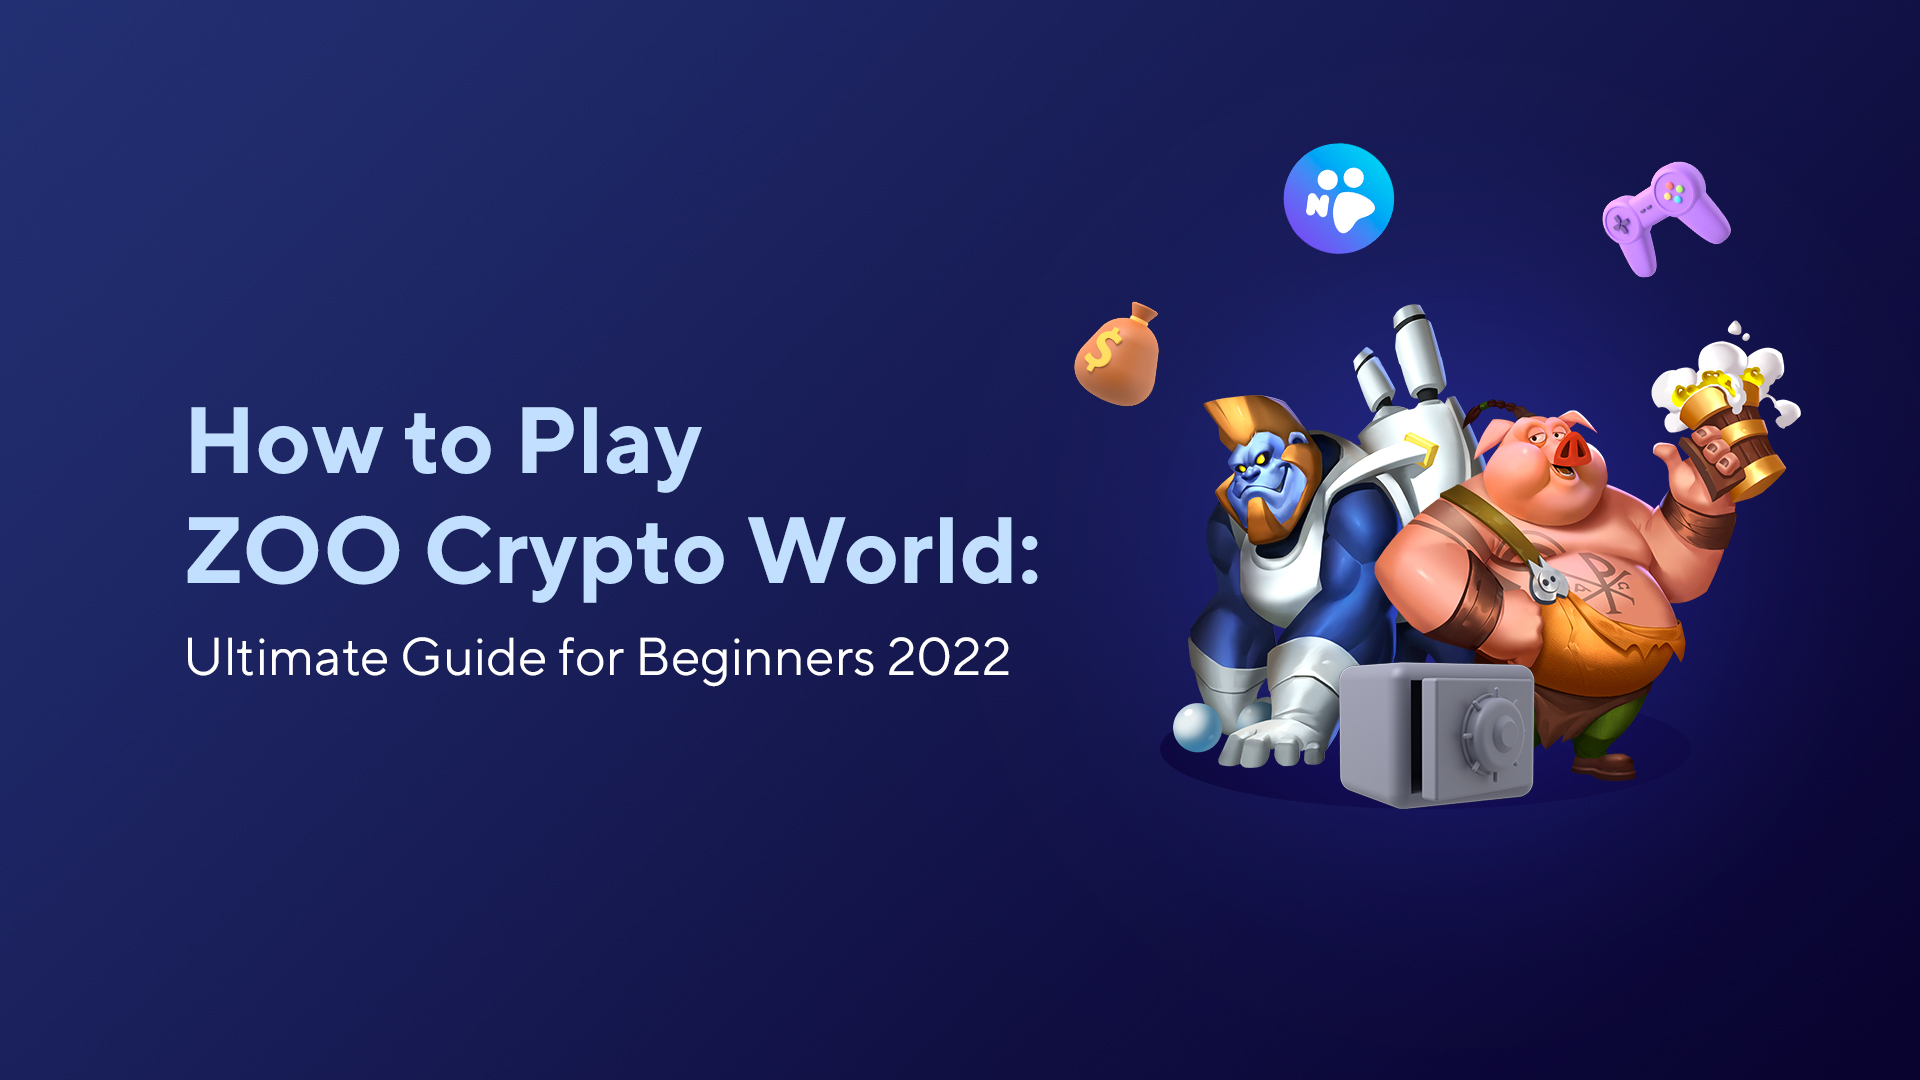 How to Play ZOO Crypto World: Ultimate Guide for Beginners 2022